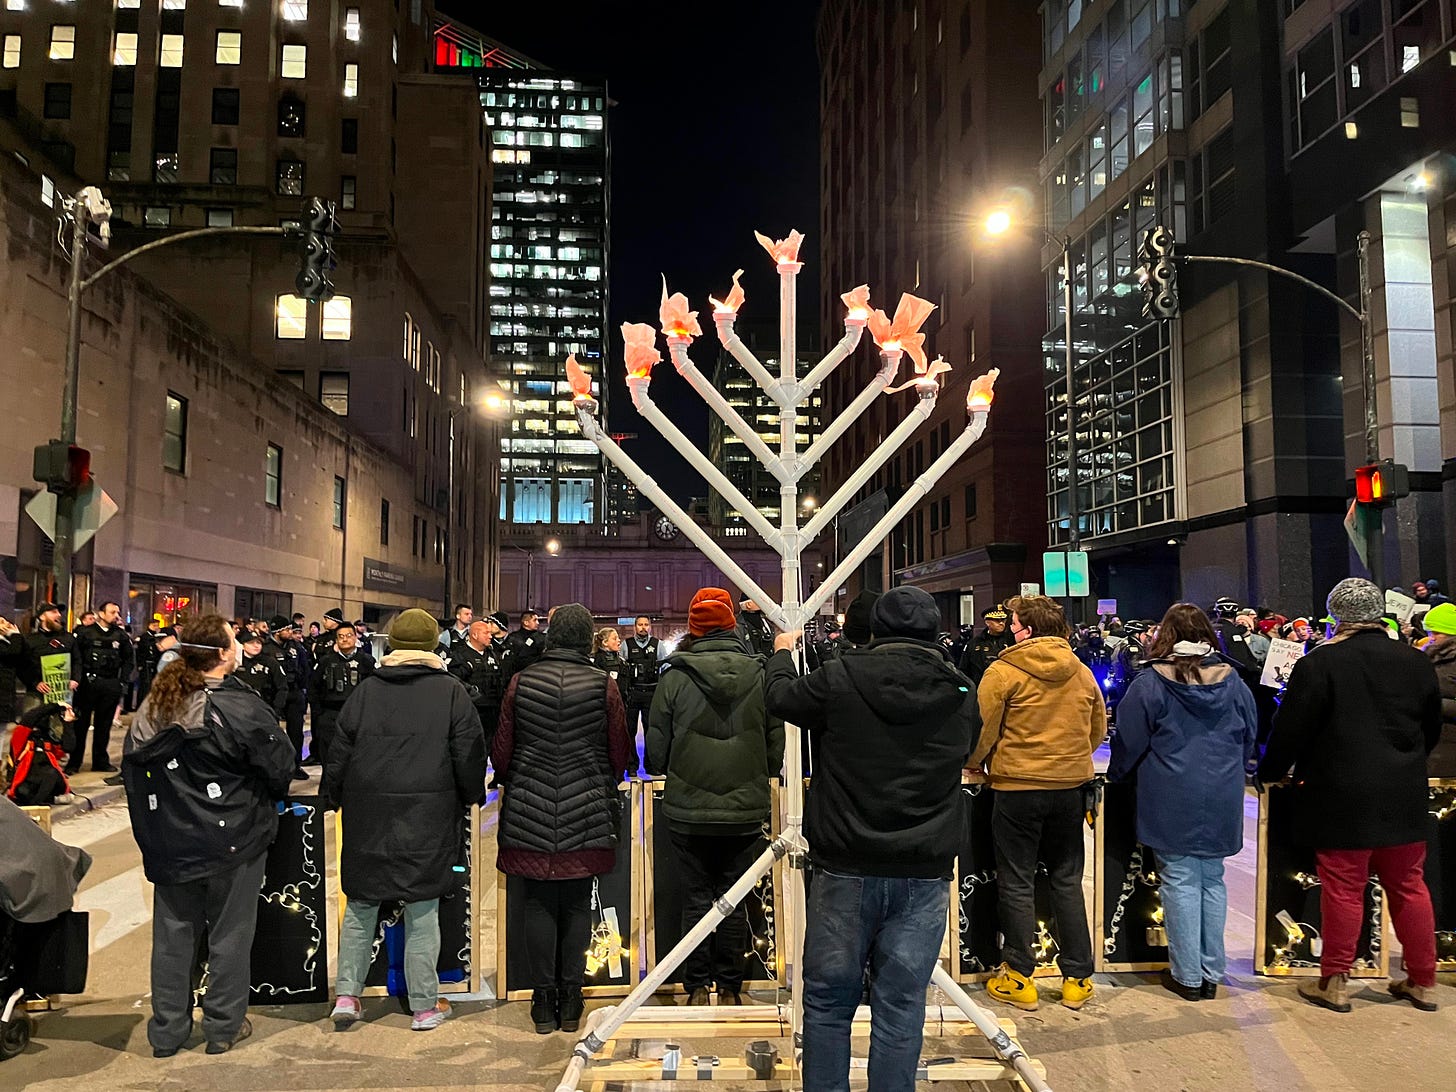 A photo of protesters holding lighted letters while blocking a street, taken from behind. There is a large menorah behind them.